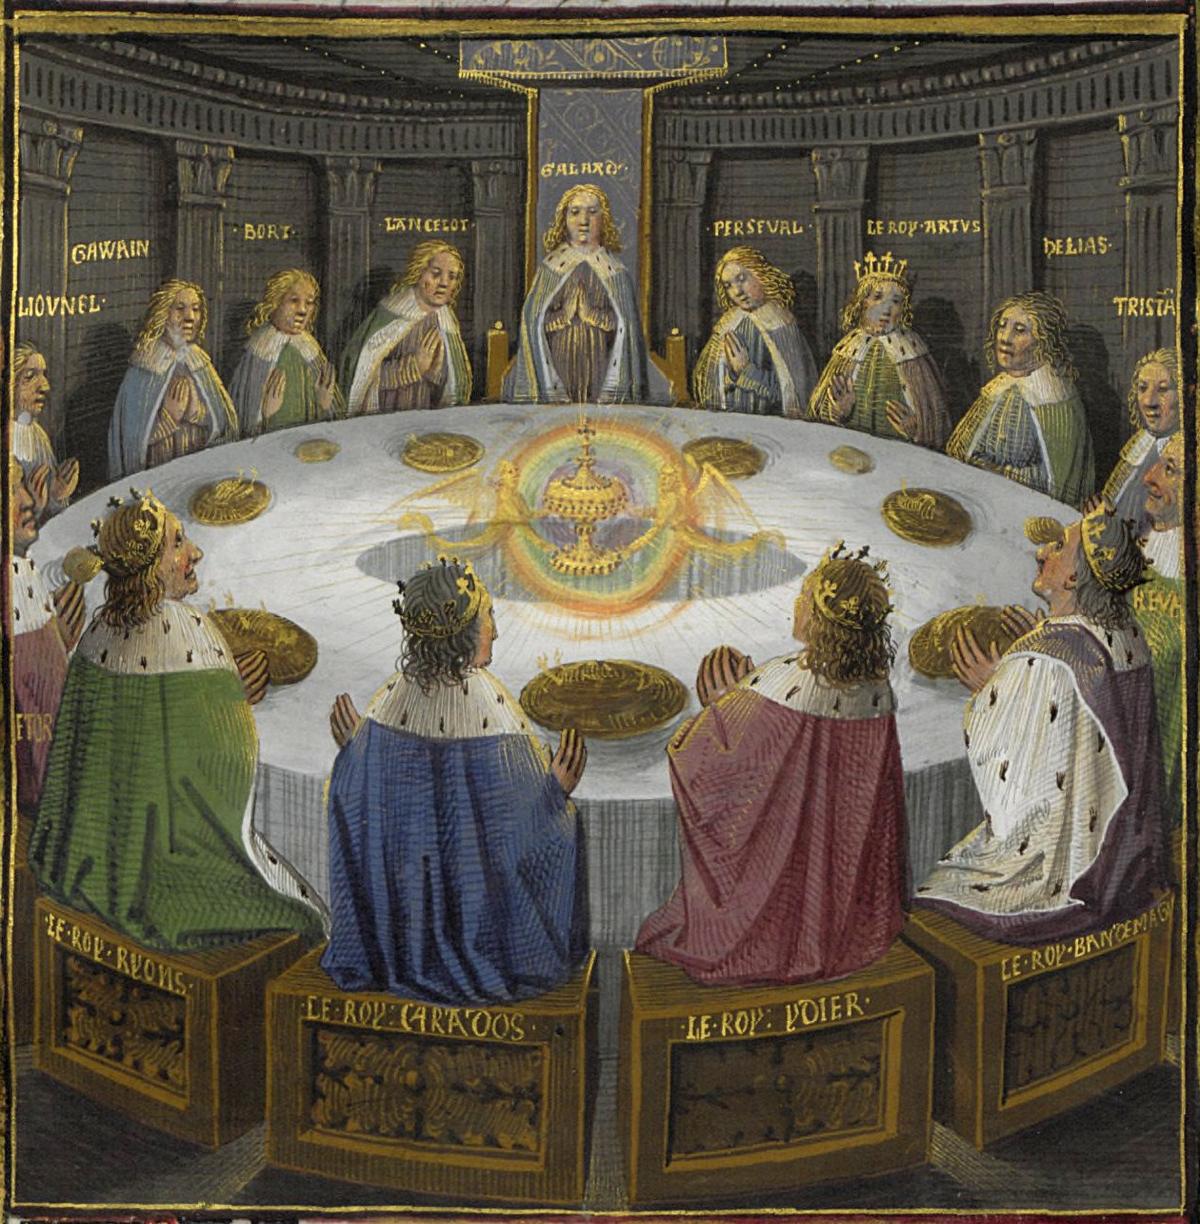 King Arthur's knights, gathered at the Round Table to celebrate the Pentecost, see a vision of the Holy Grail. This scene is depicted in a 15th-century manuscript of “Lancelot and the Holy Grail.” (Wikimedia Commons)